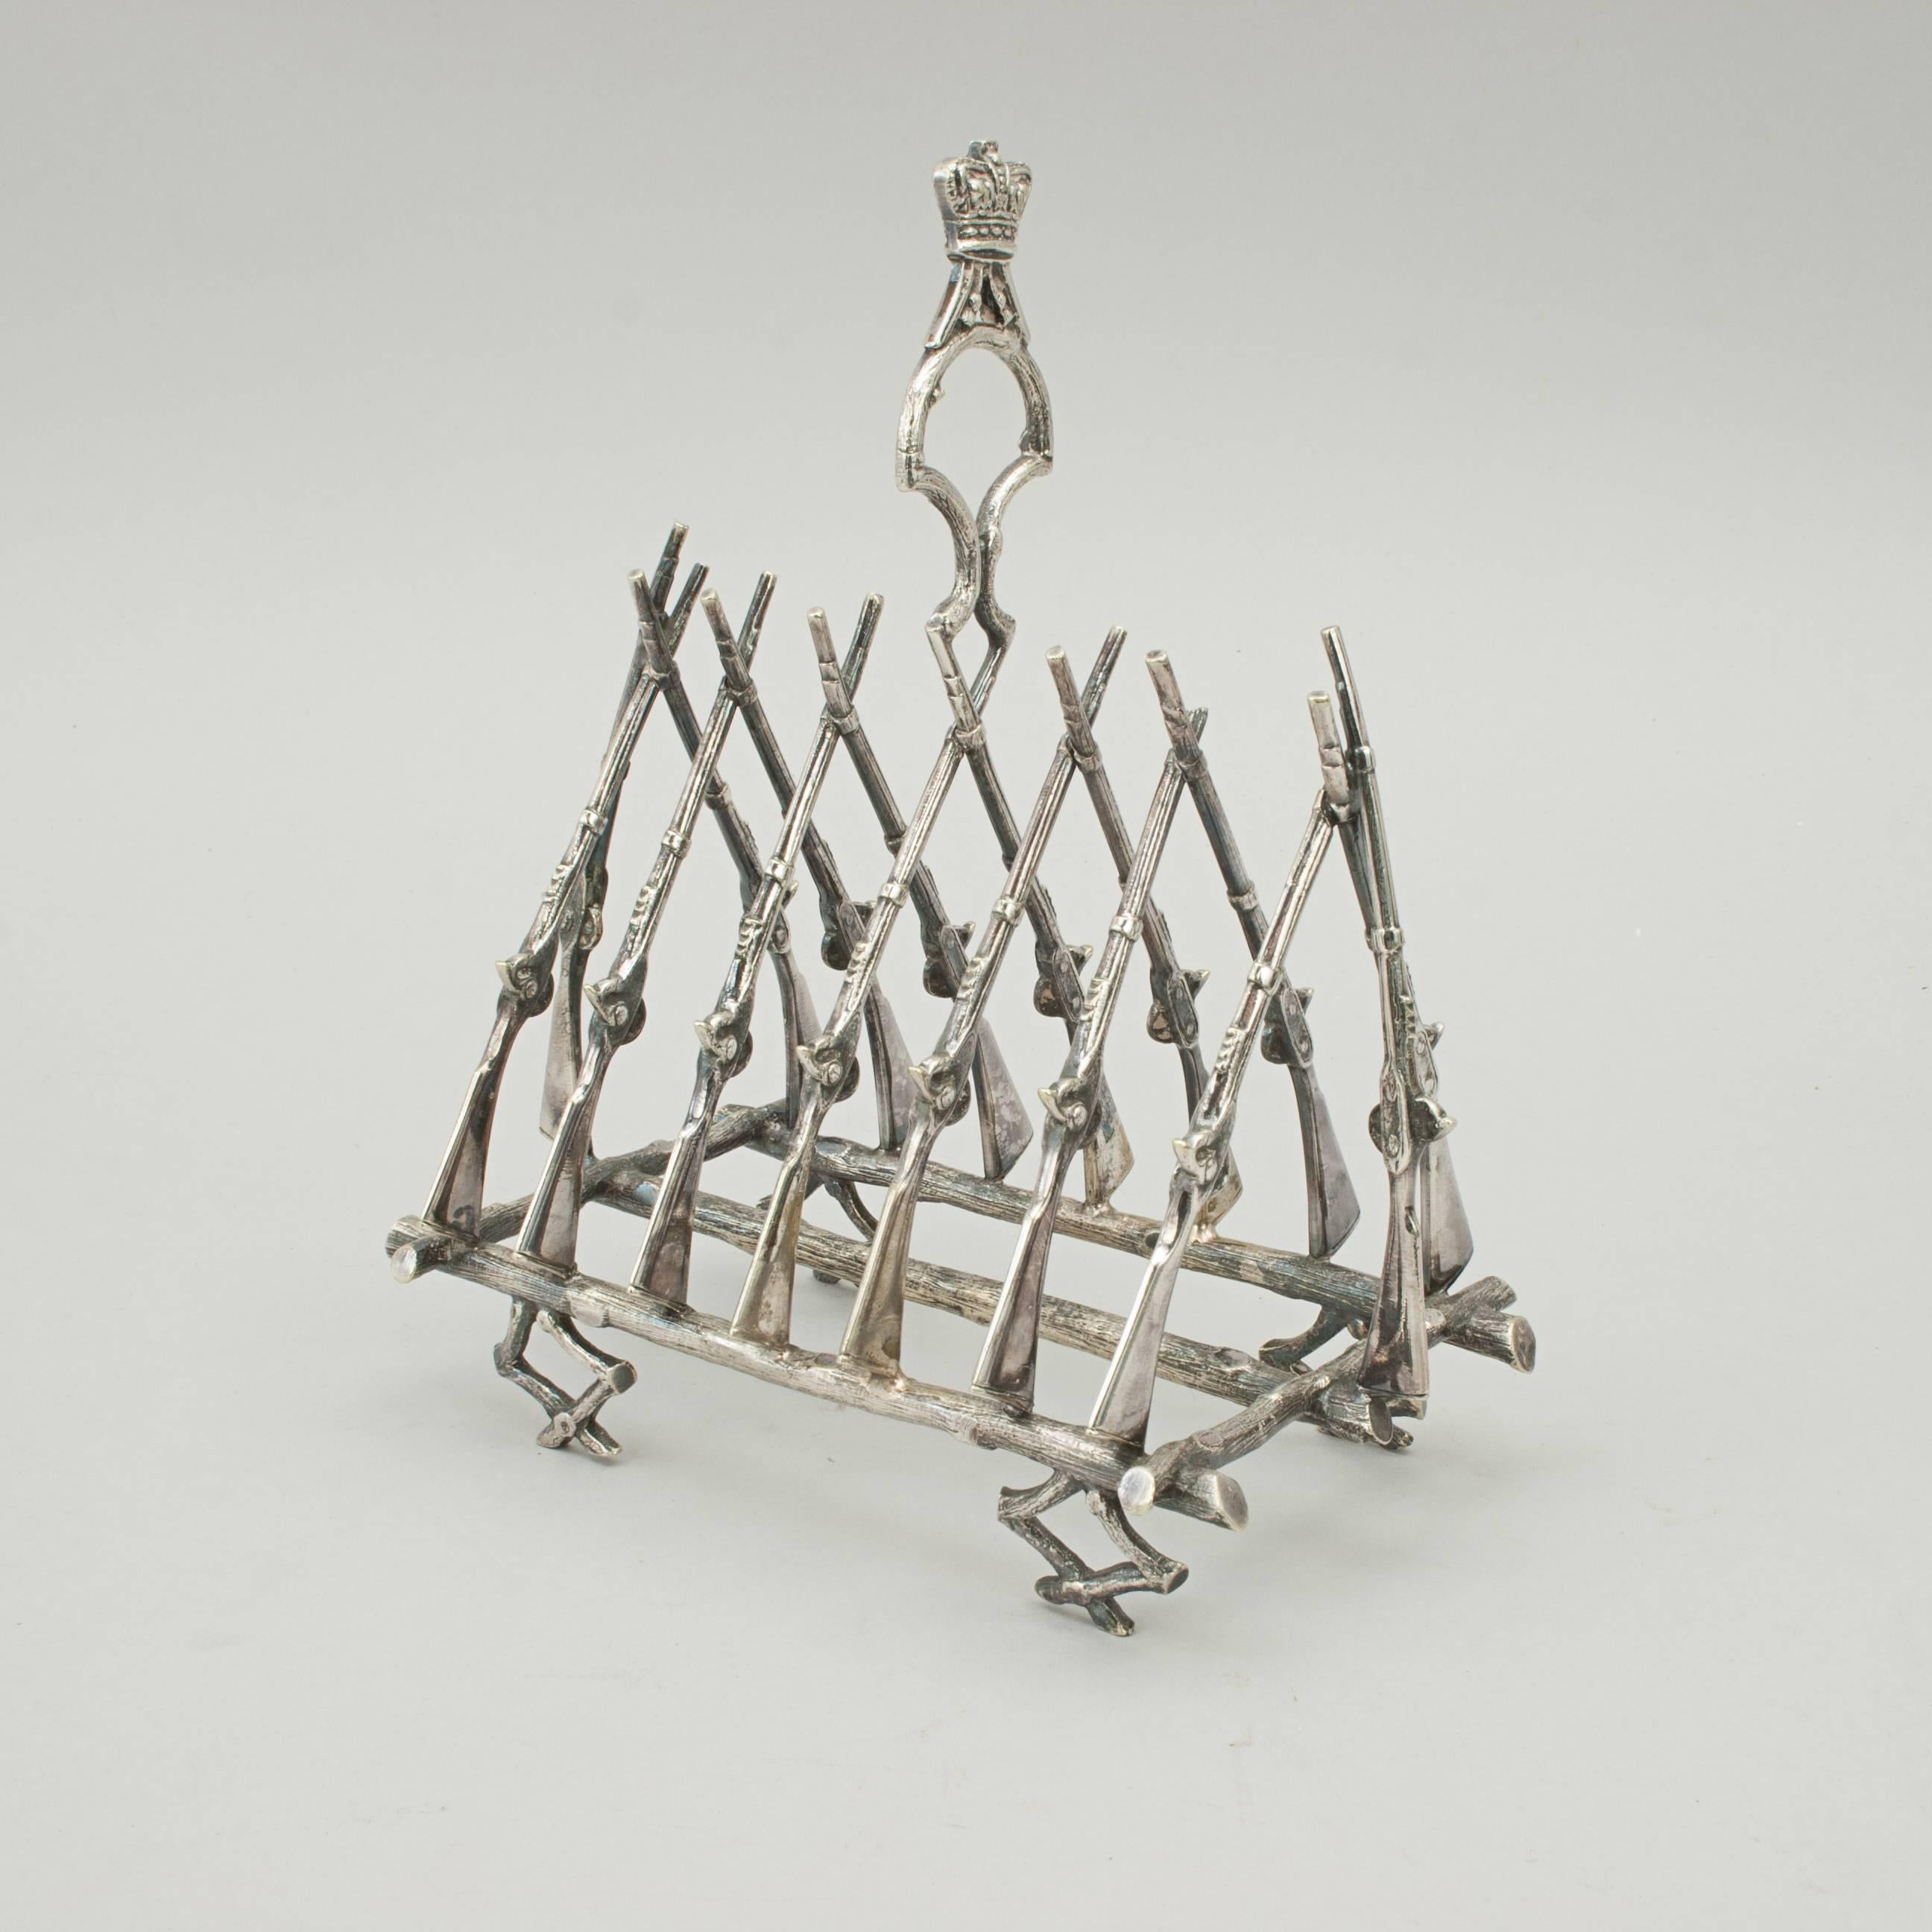 A silver plated shooting toast rack which can also be used as a letter rack or napkin holder. The dividers are in the shape of crossed flintlock rifles. The base is made up of crossed logs. A nice looking toast rack for six slices.